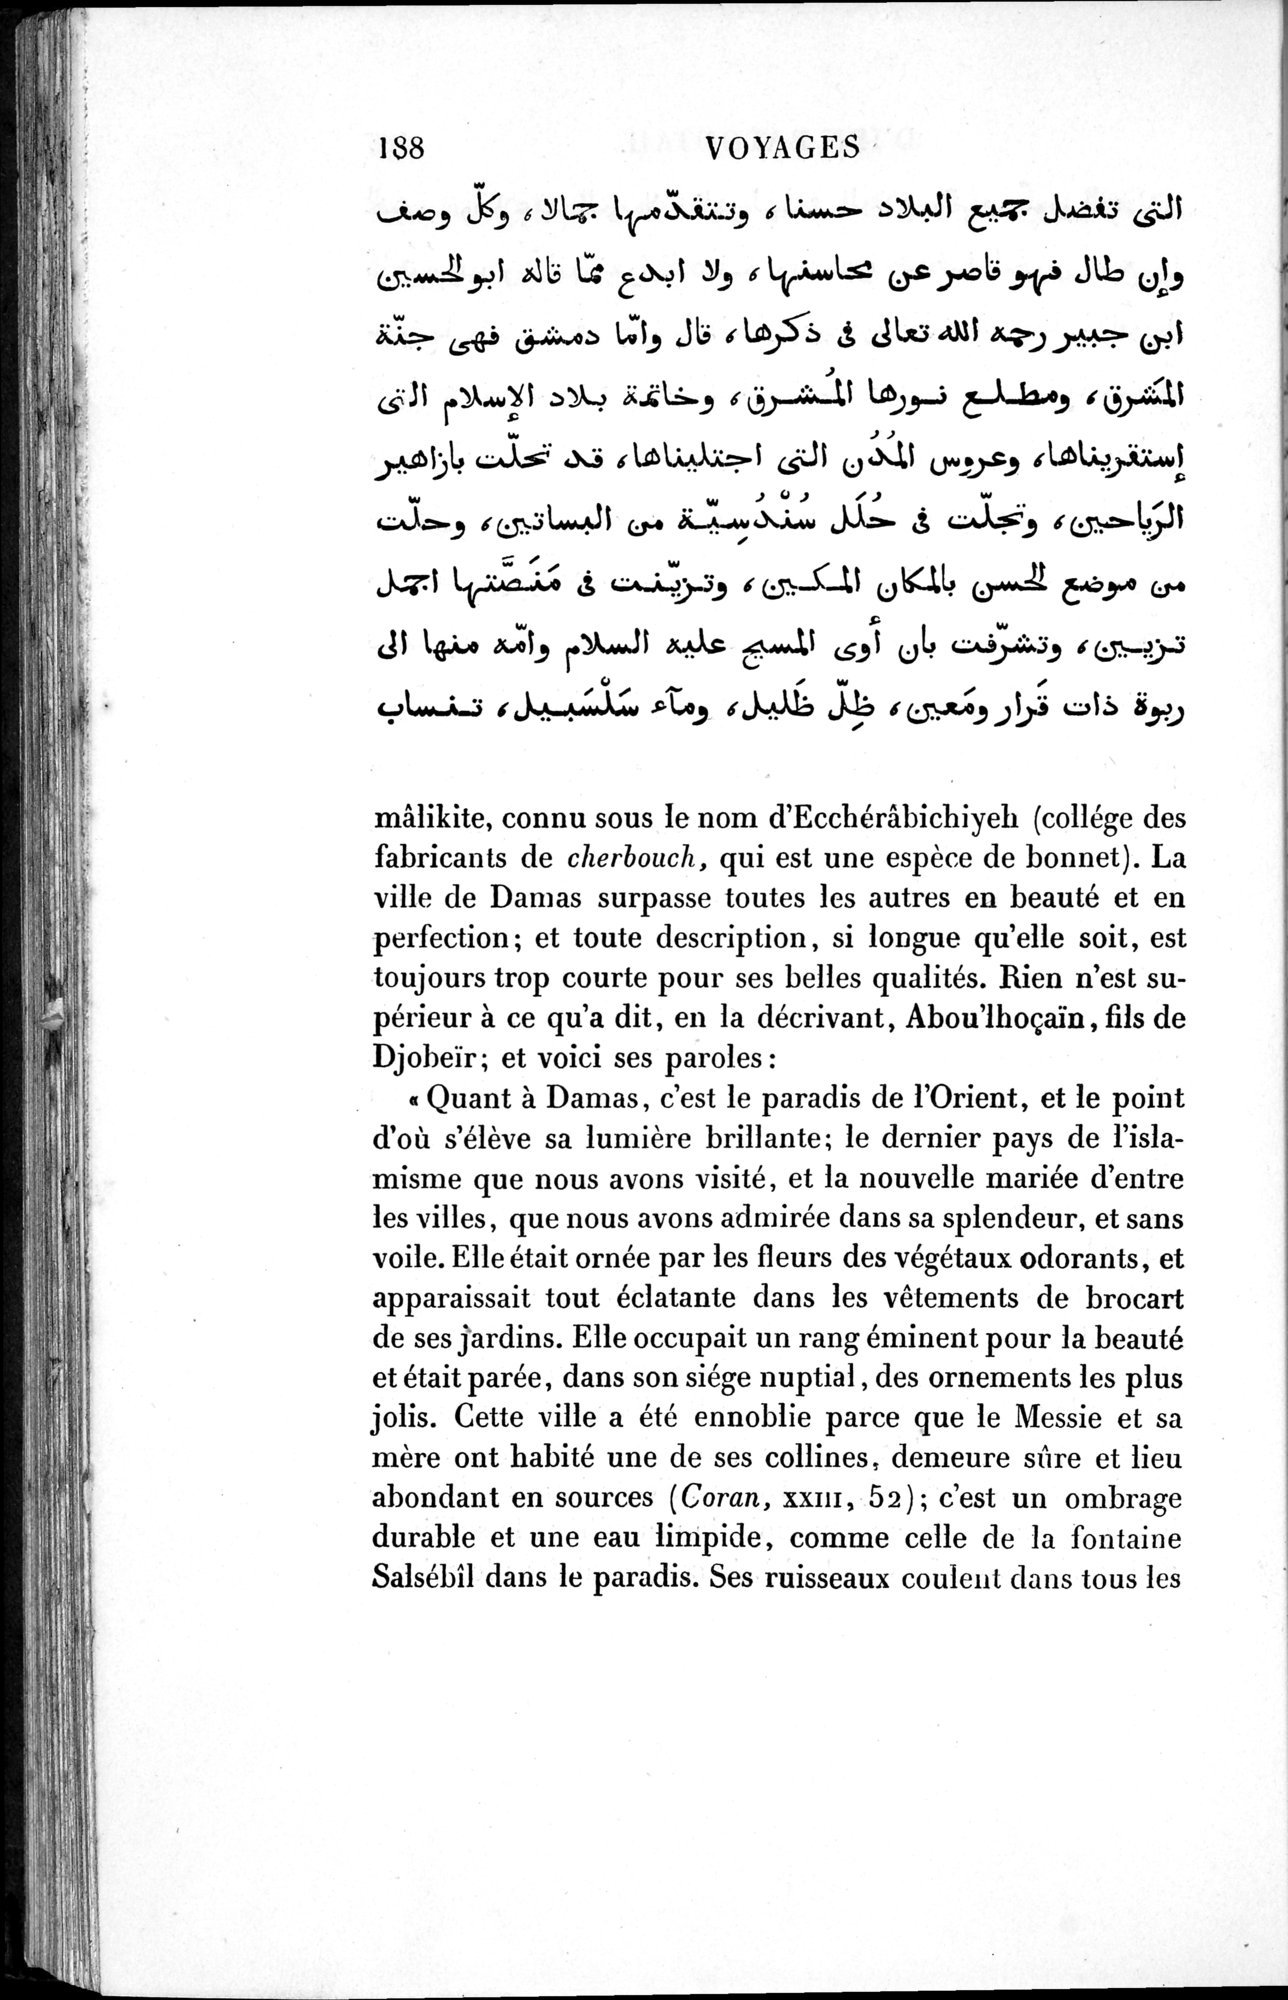 Voyages d'Ibn Batoutah : vol.1 / Page 248 (Grayscale High Resolution Image)